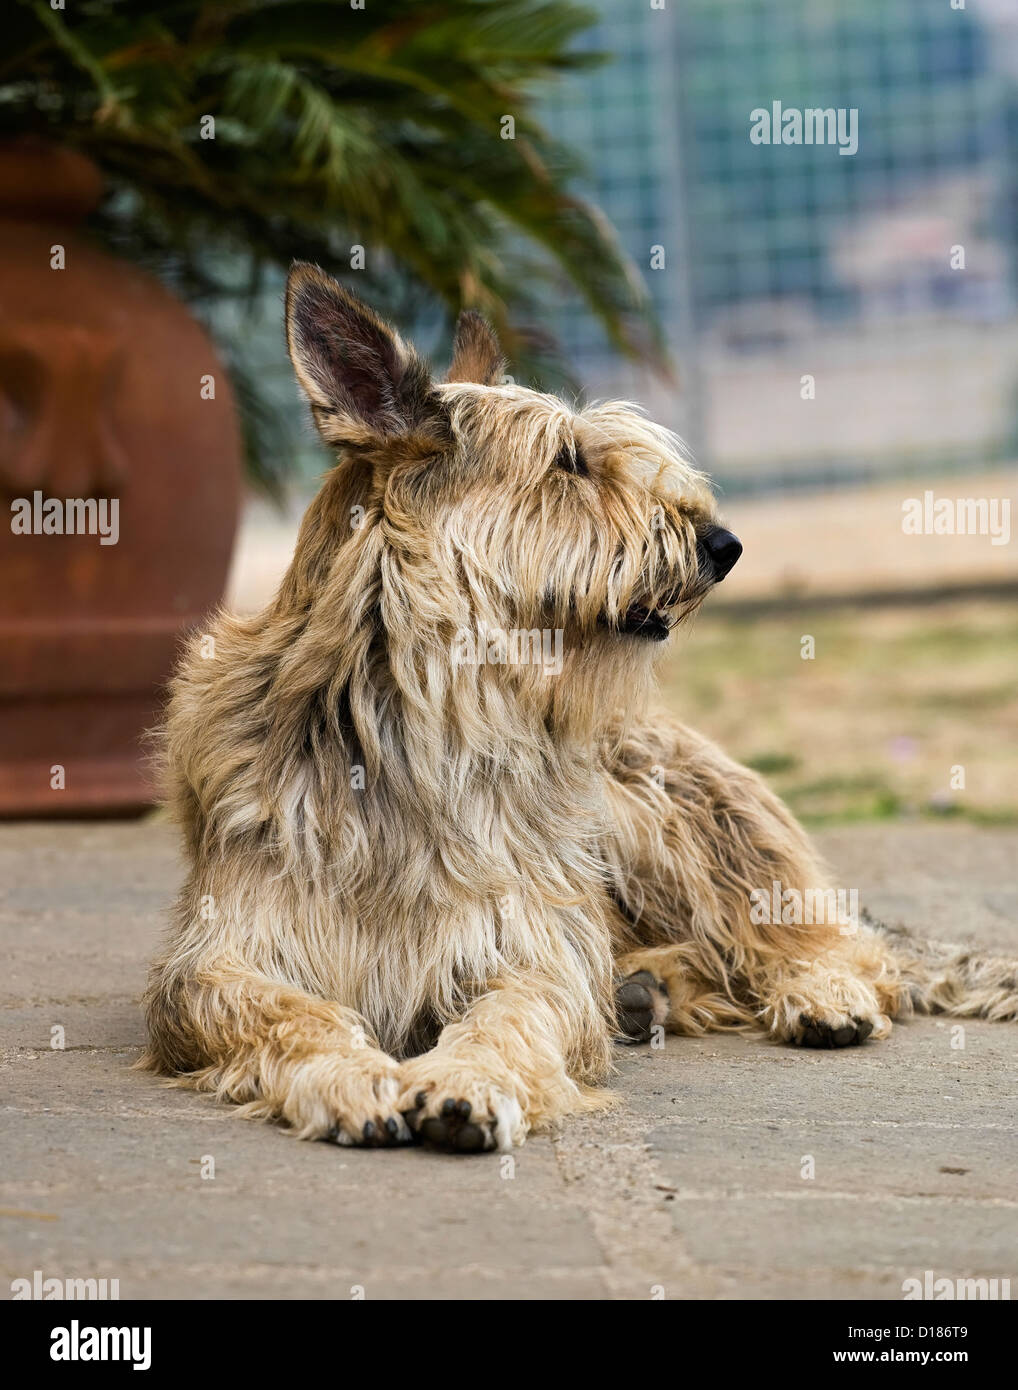 Italy, Berger picard dog Stock Photo